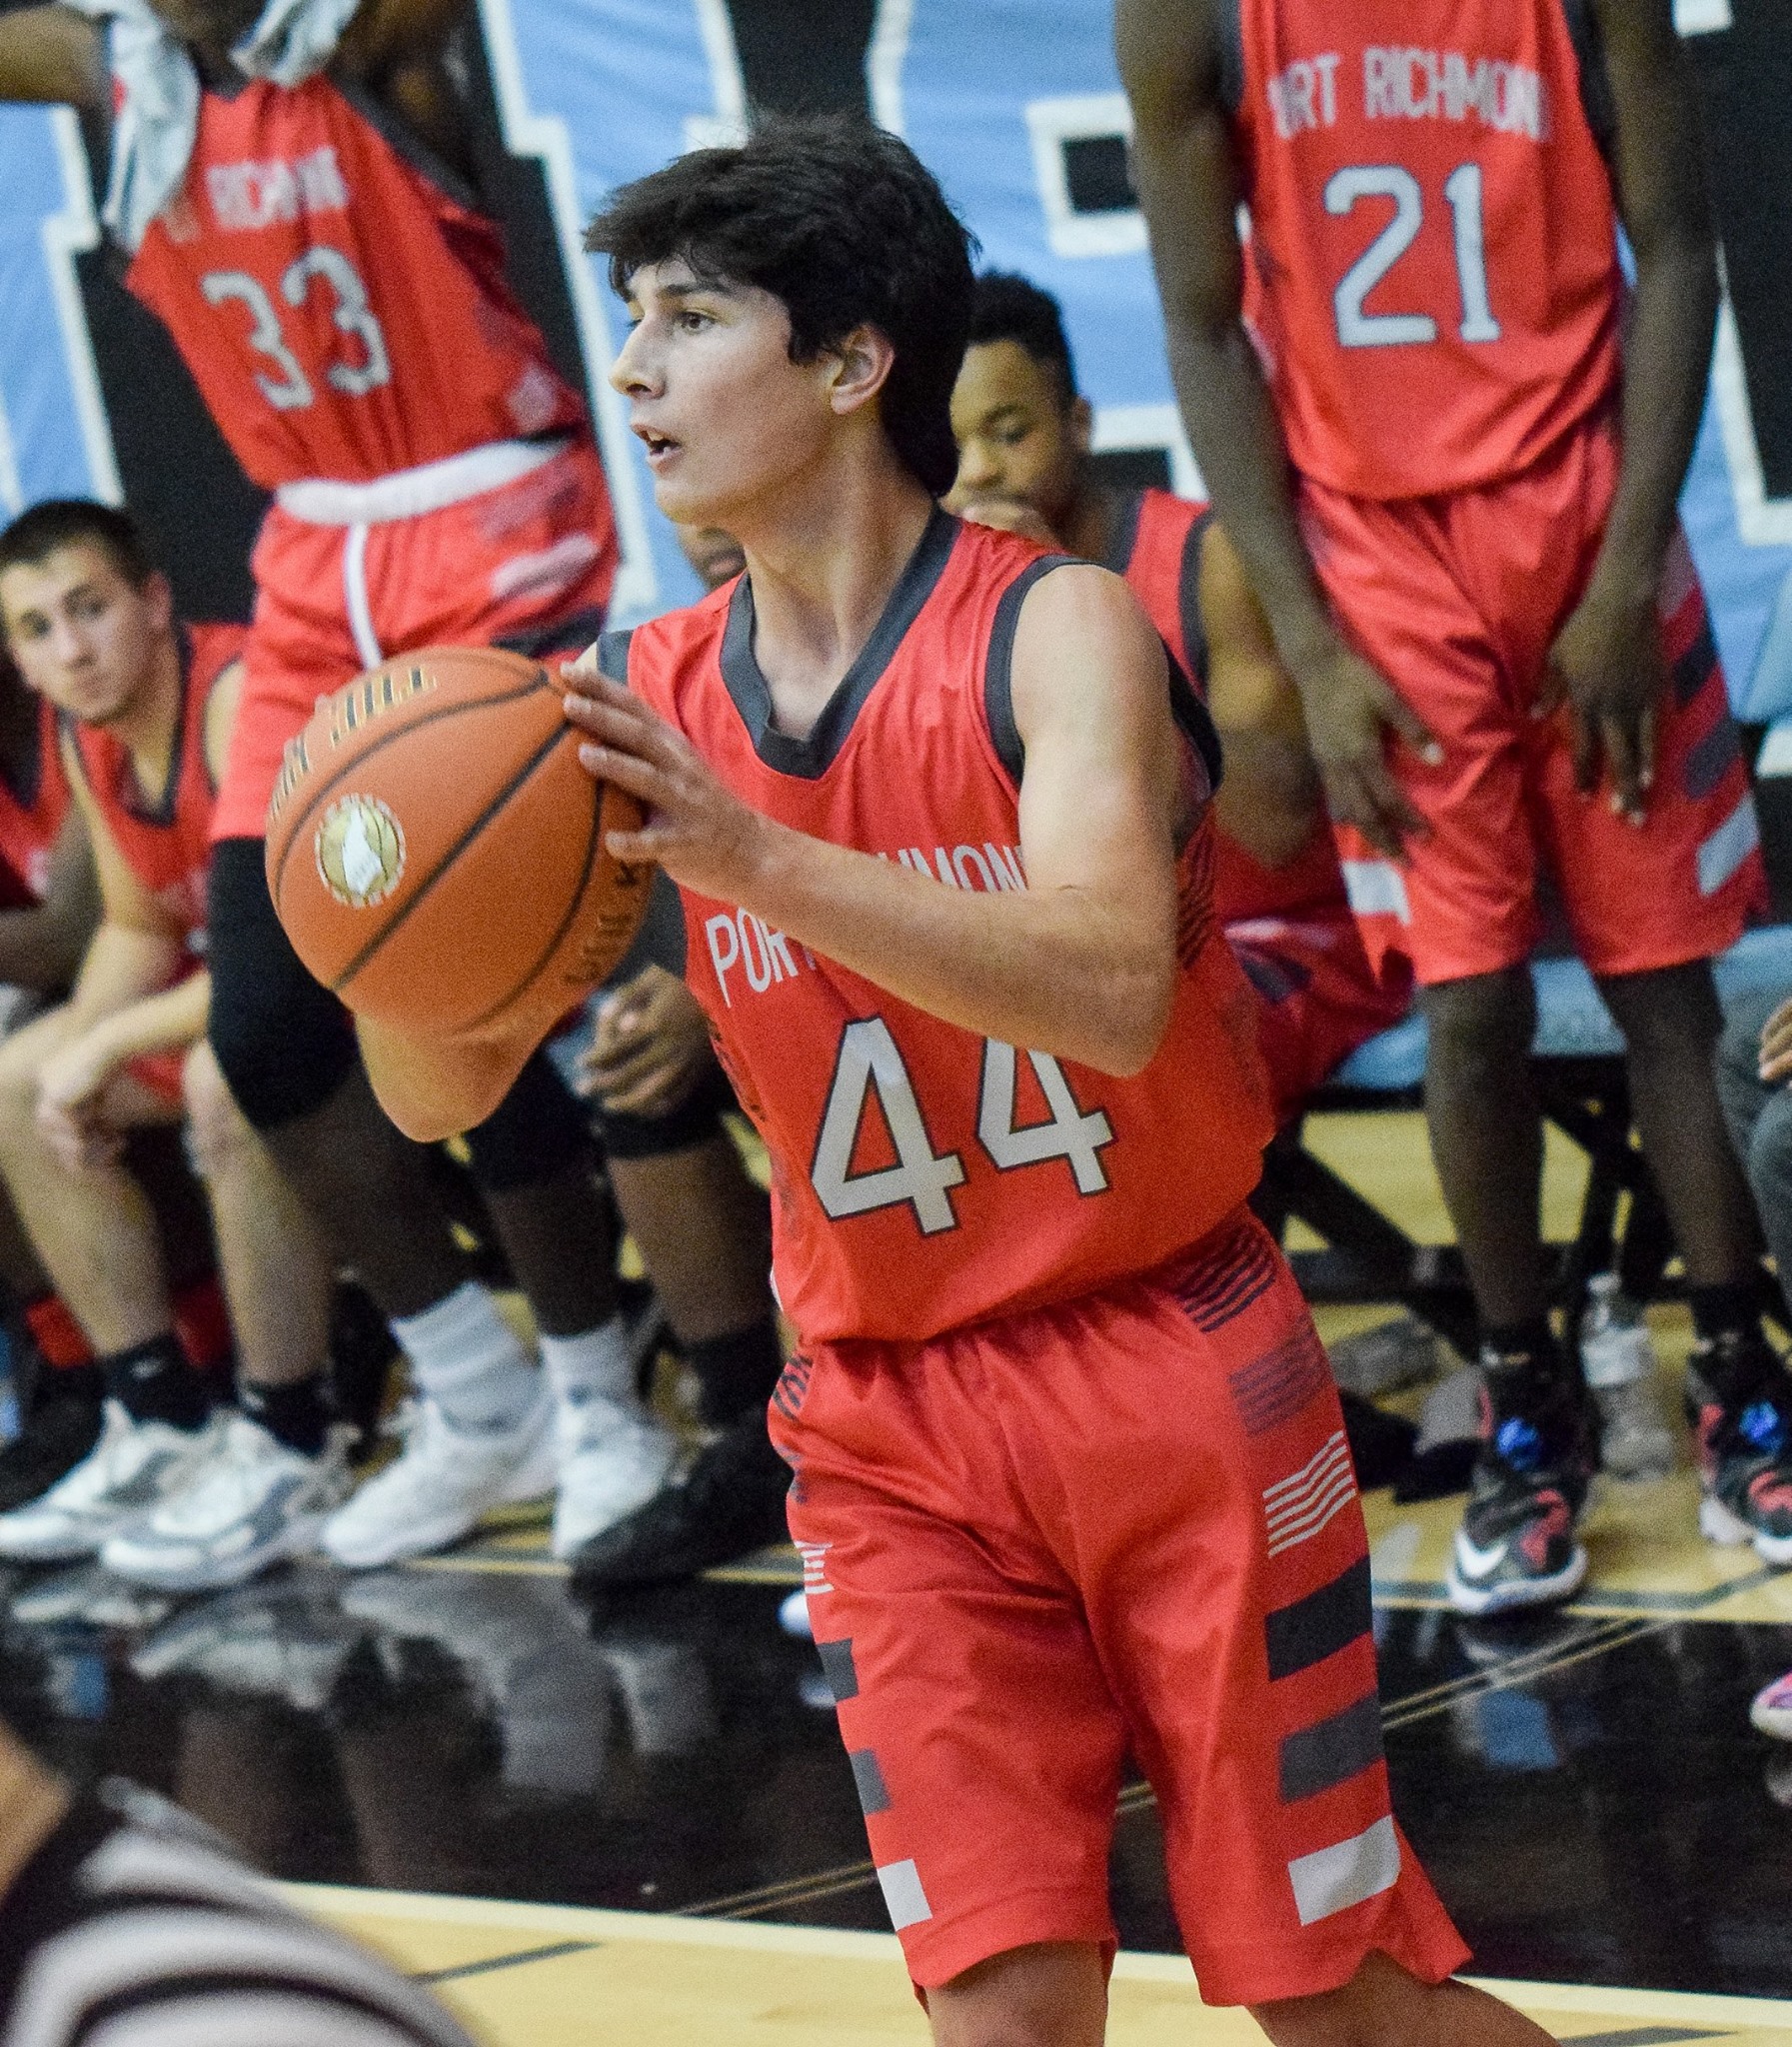 Red White Black and Grey Basketball Uniforms, Jersey and Shorts 